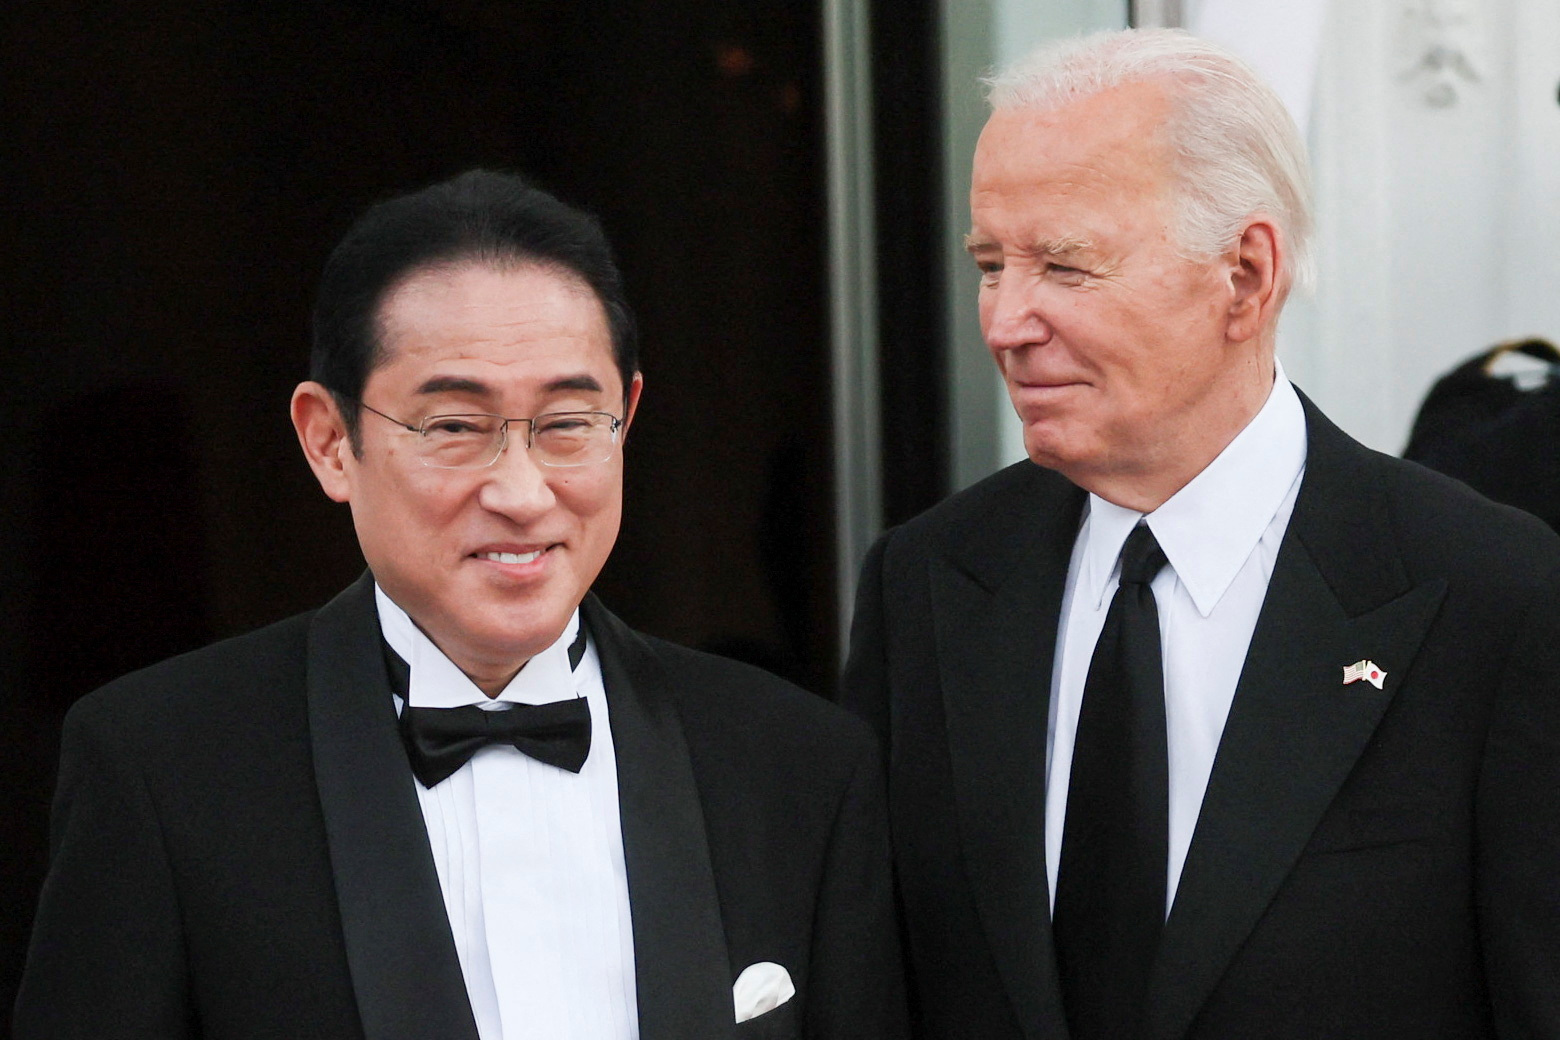 U.S. President Biden hosts Japanese PM Fumio Kishida for an official State Dinner at the White House in Washington